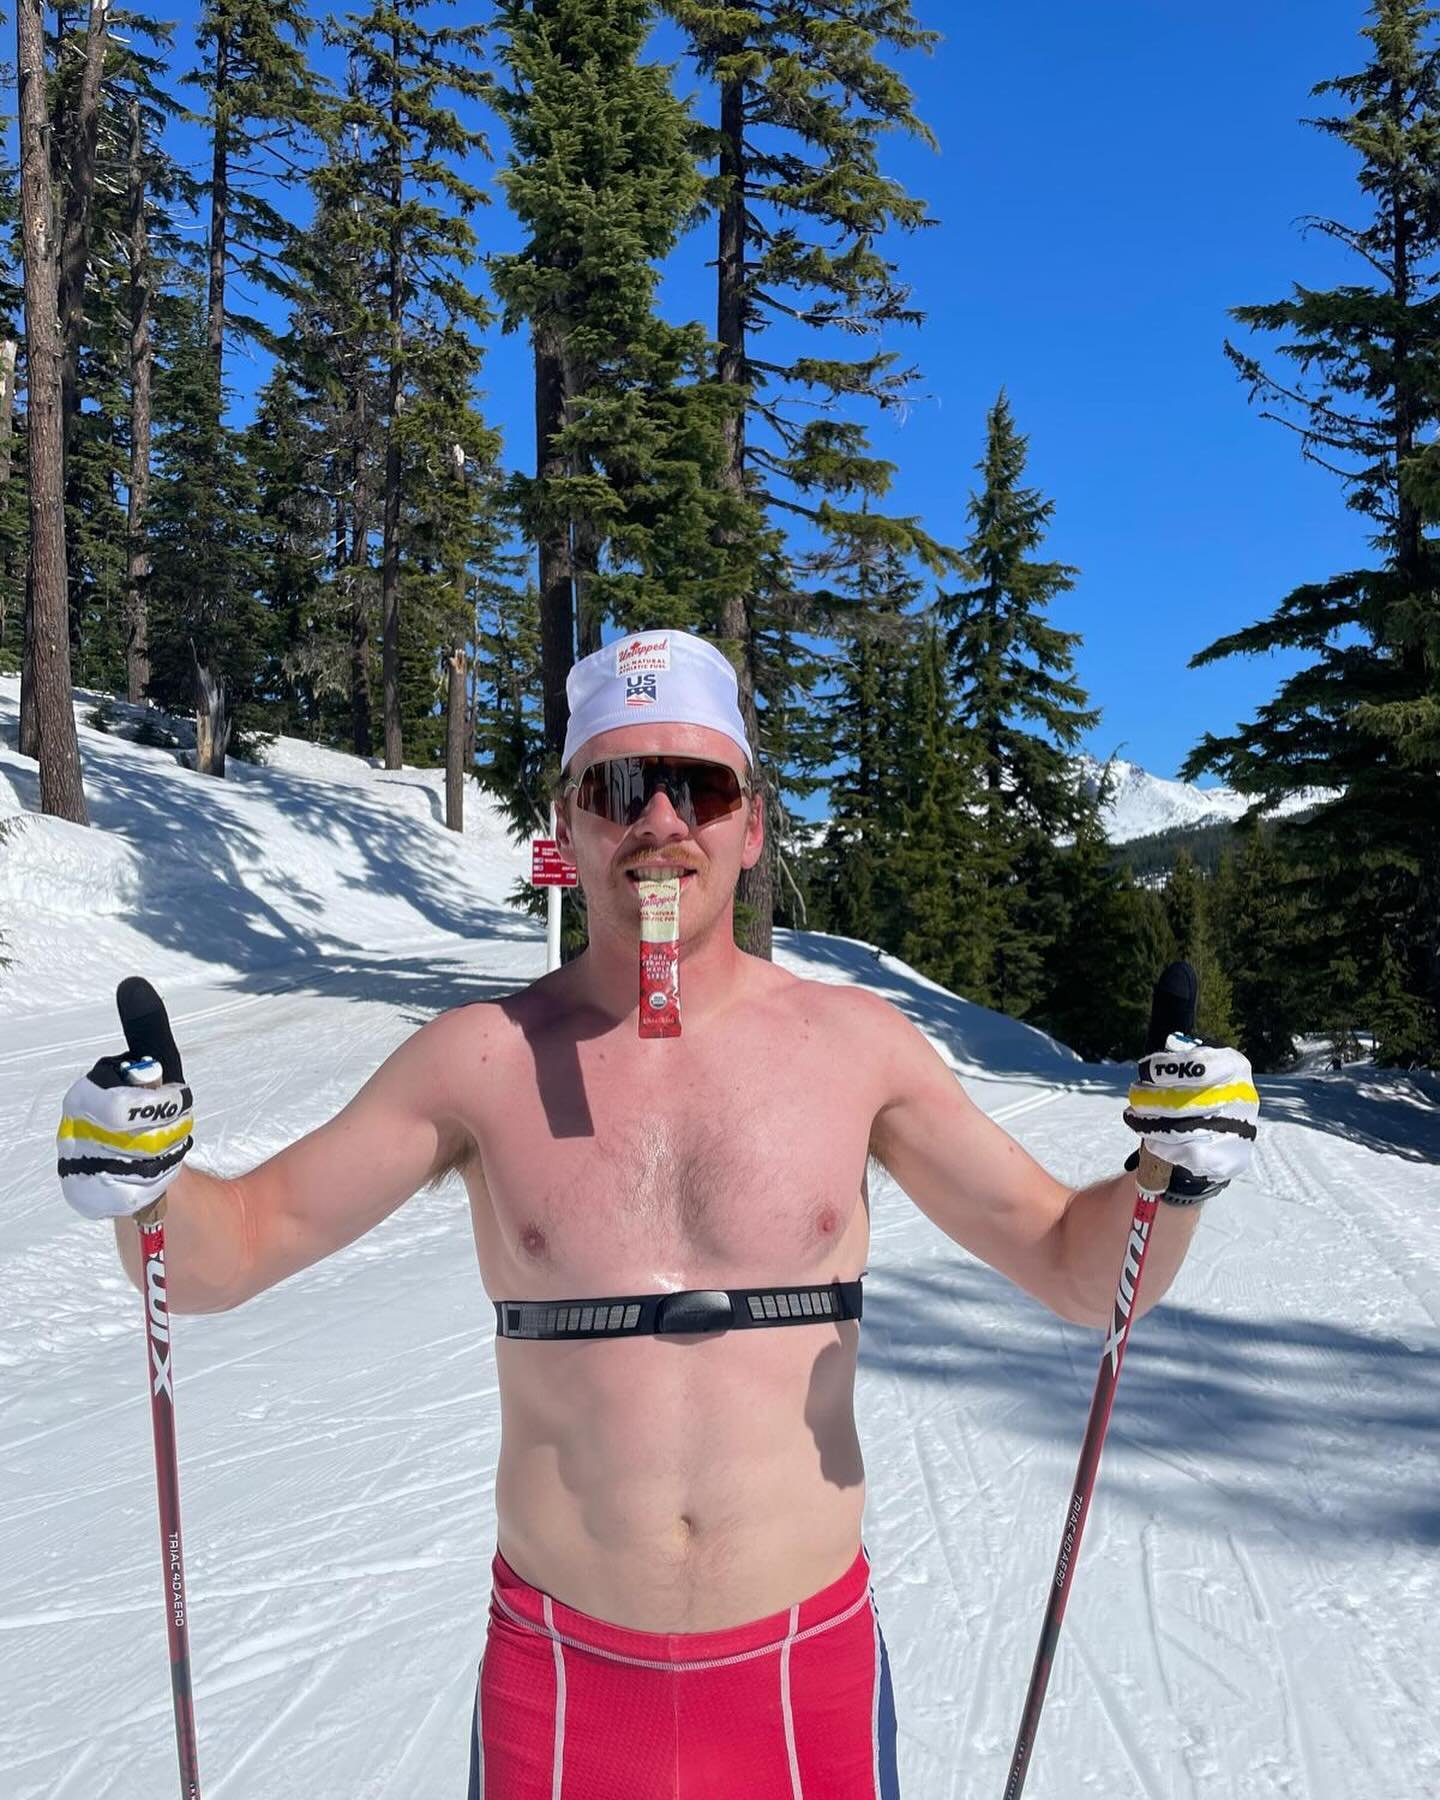 Training camp is rolling here in the big bad west! 

Been a great first week in Bend, OR, but temps like these make staying properly fueled a constant battle! 🏝️ Nothing a little VT maple can&rsquo;t sort out though. Cheers to @untappedmaple with th